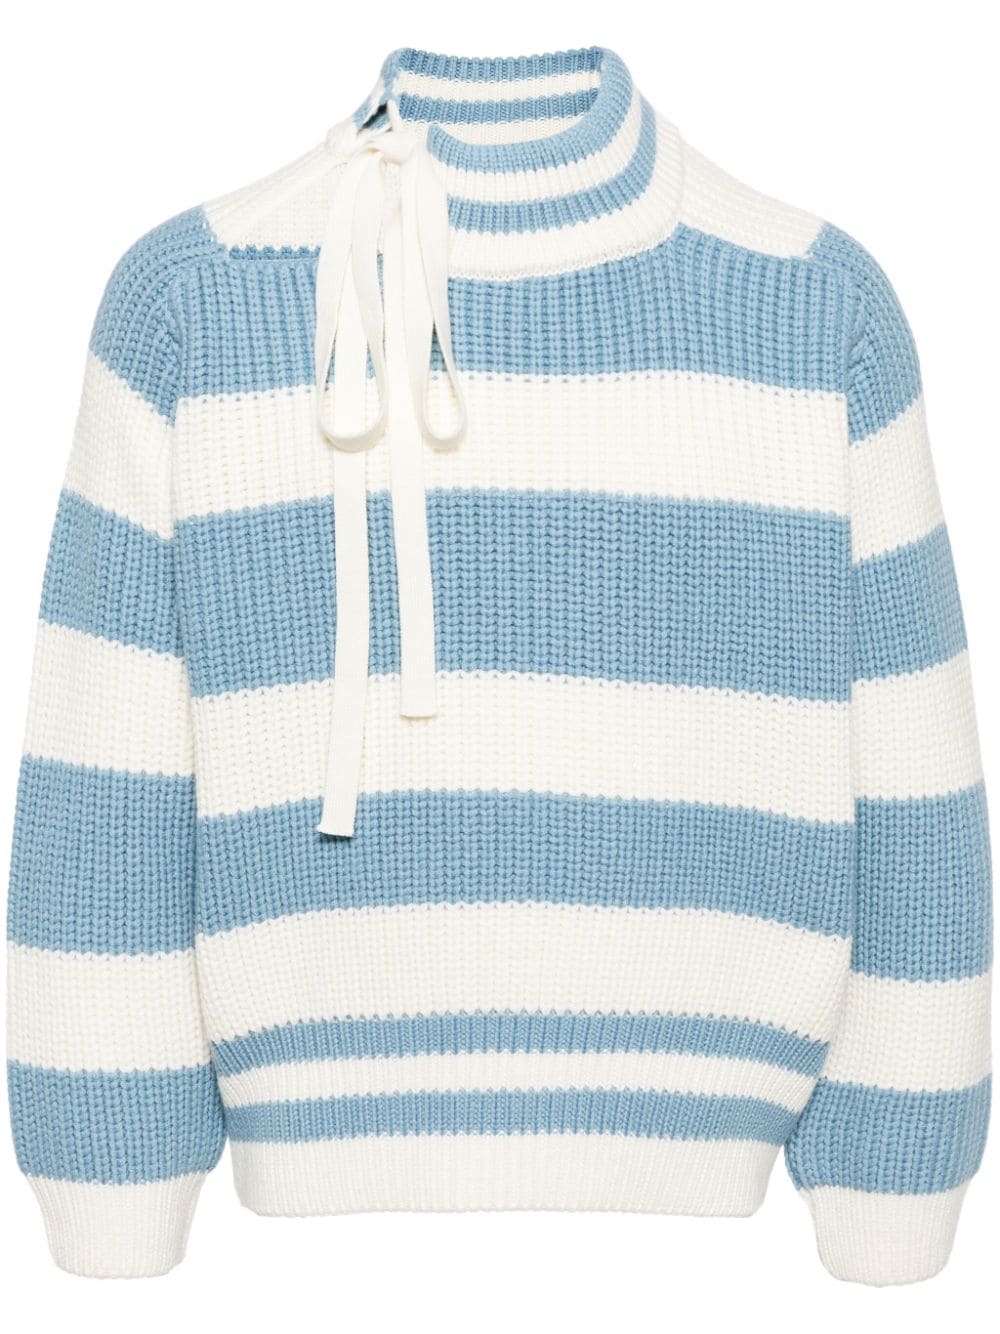 S.S.DALEY Gestreifter Lawrence Pullover - Blau von S.S.DALEY